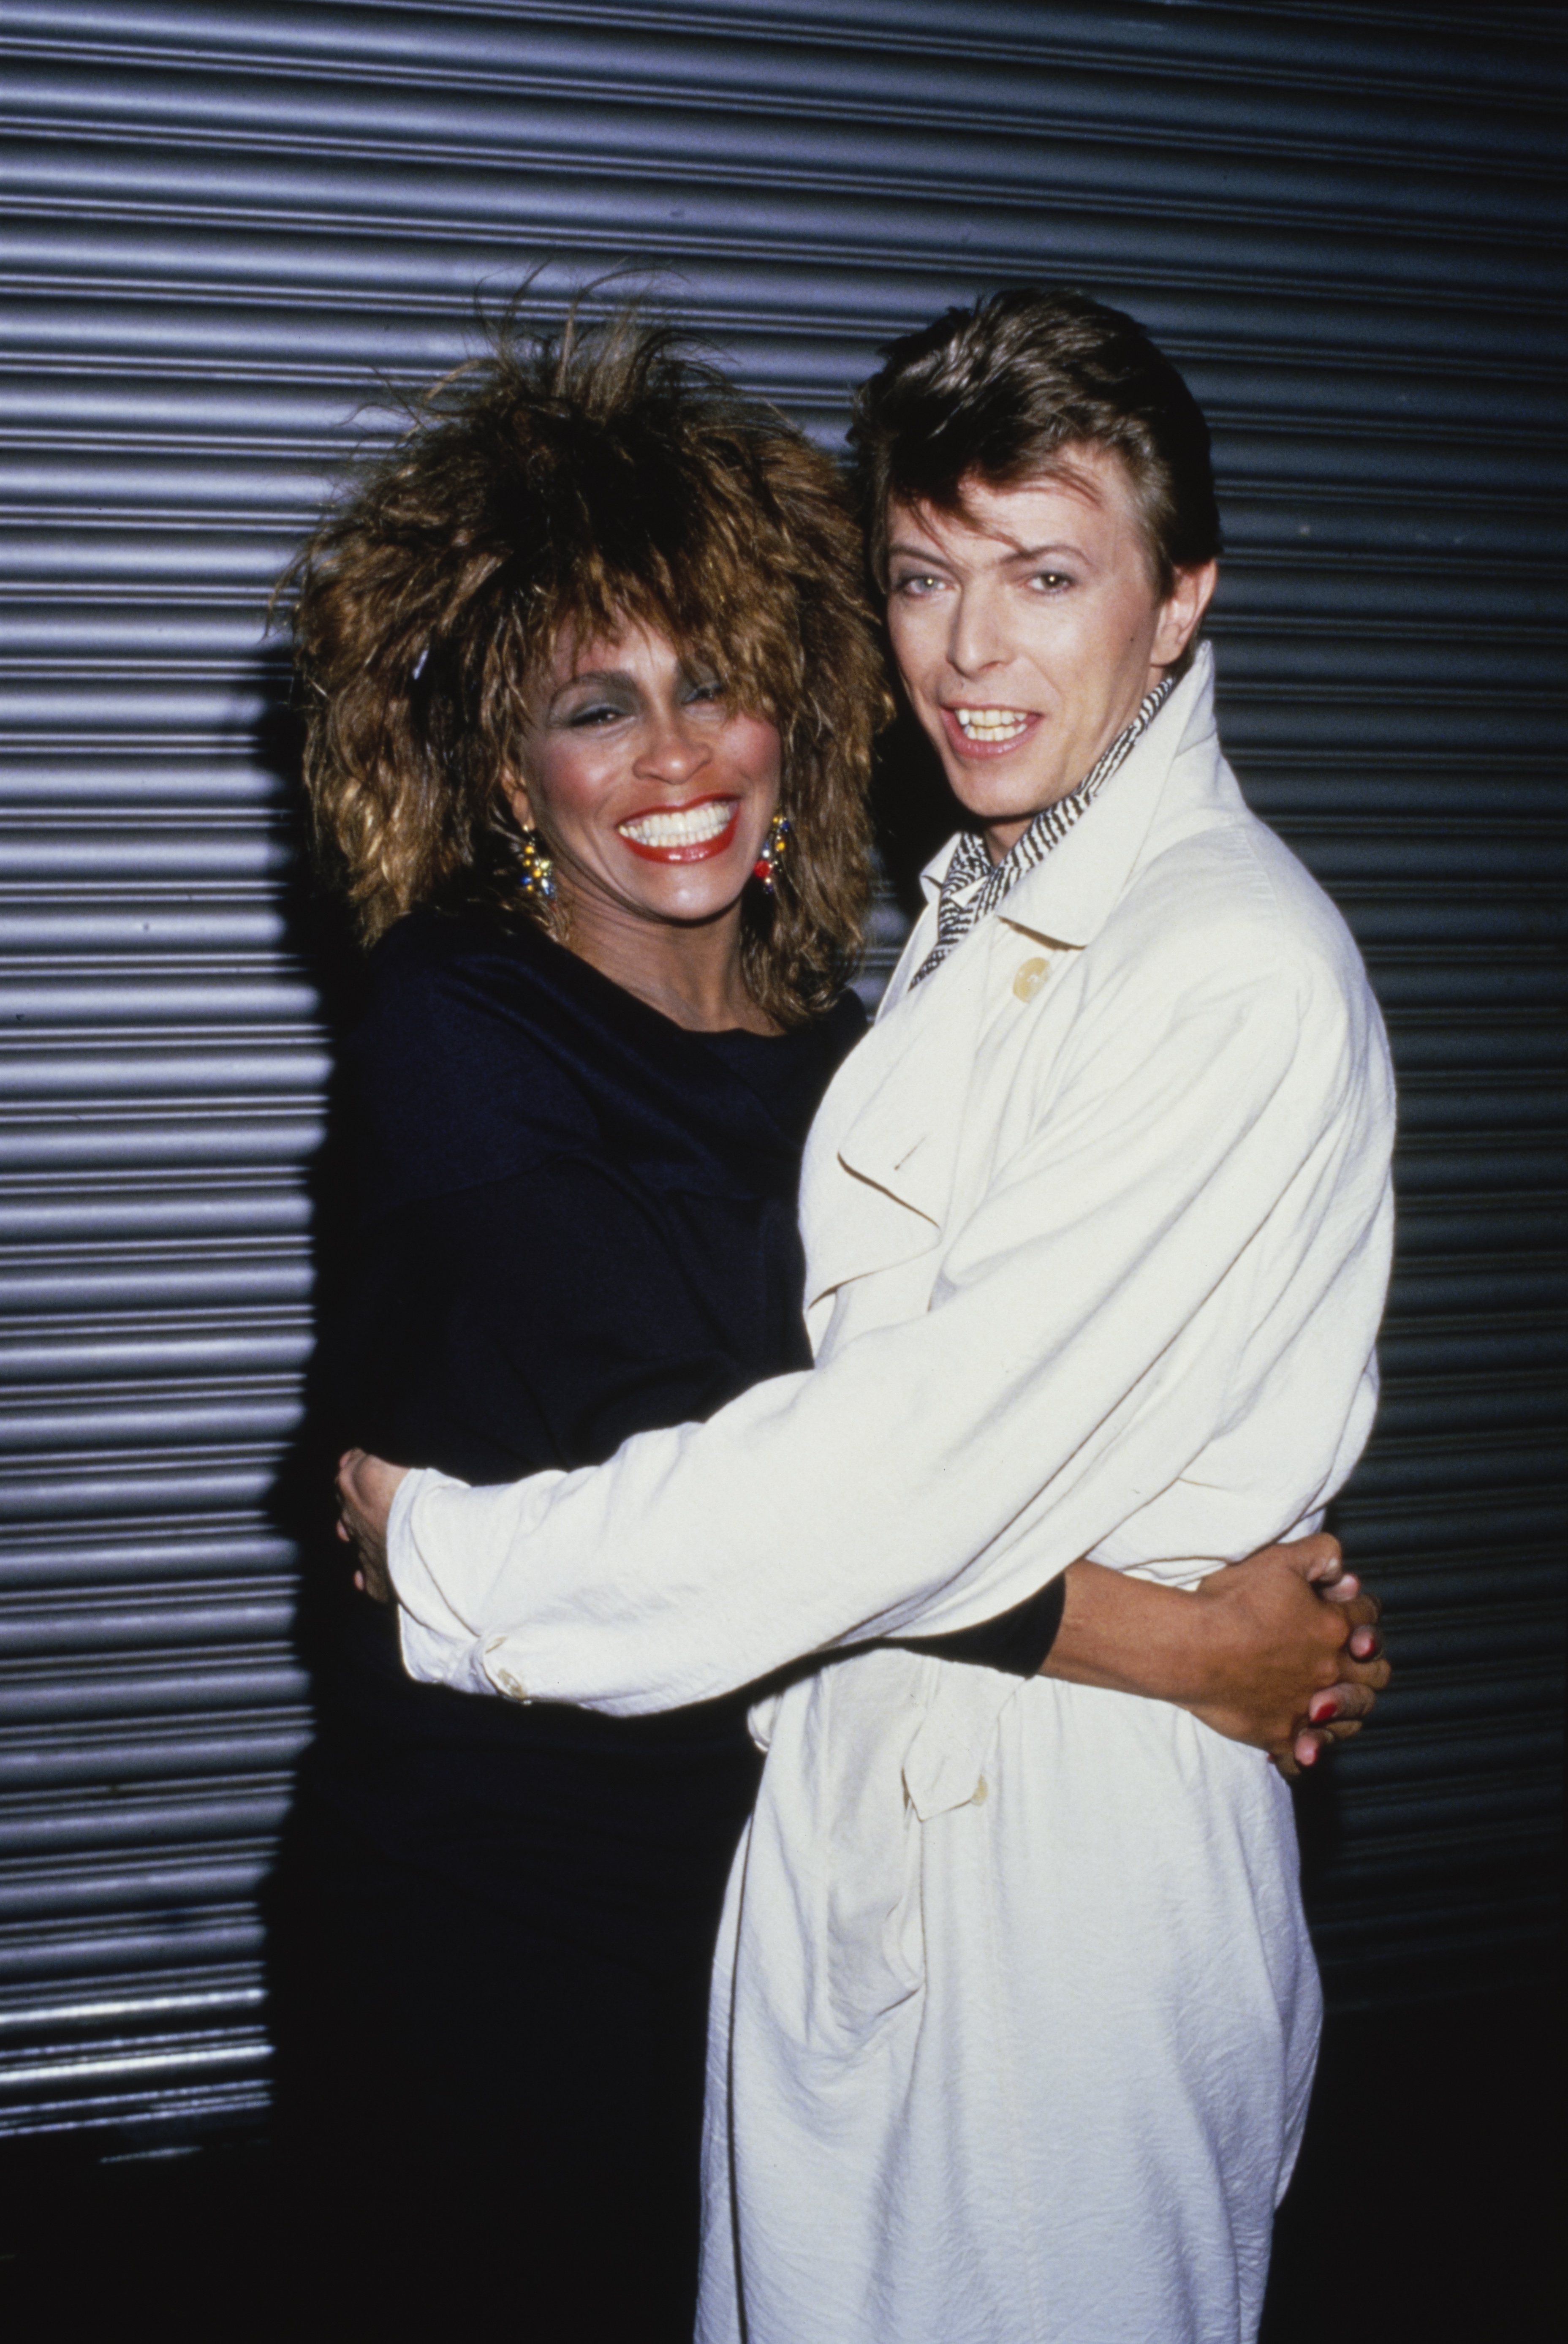 Tina Turner and David Bowie in London, 1985 | Source: Getty Images